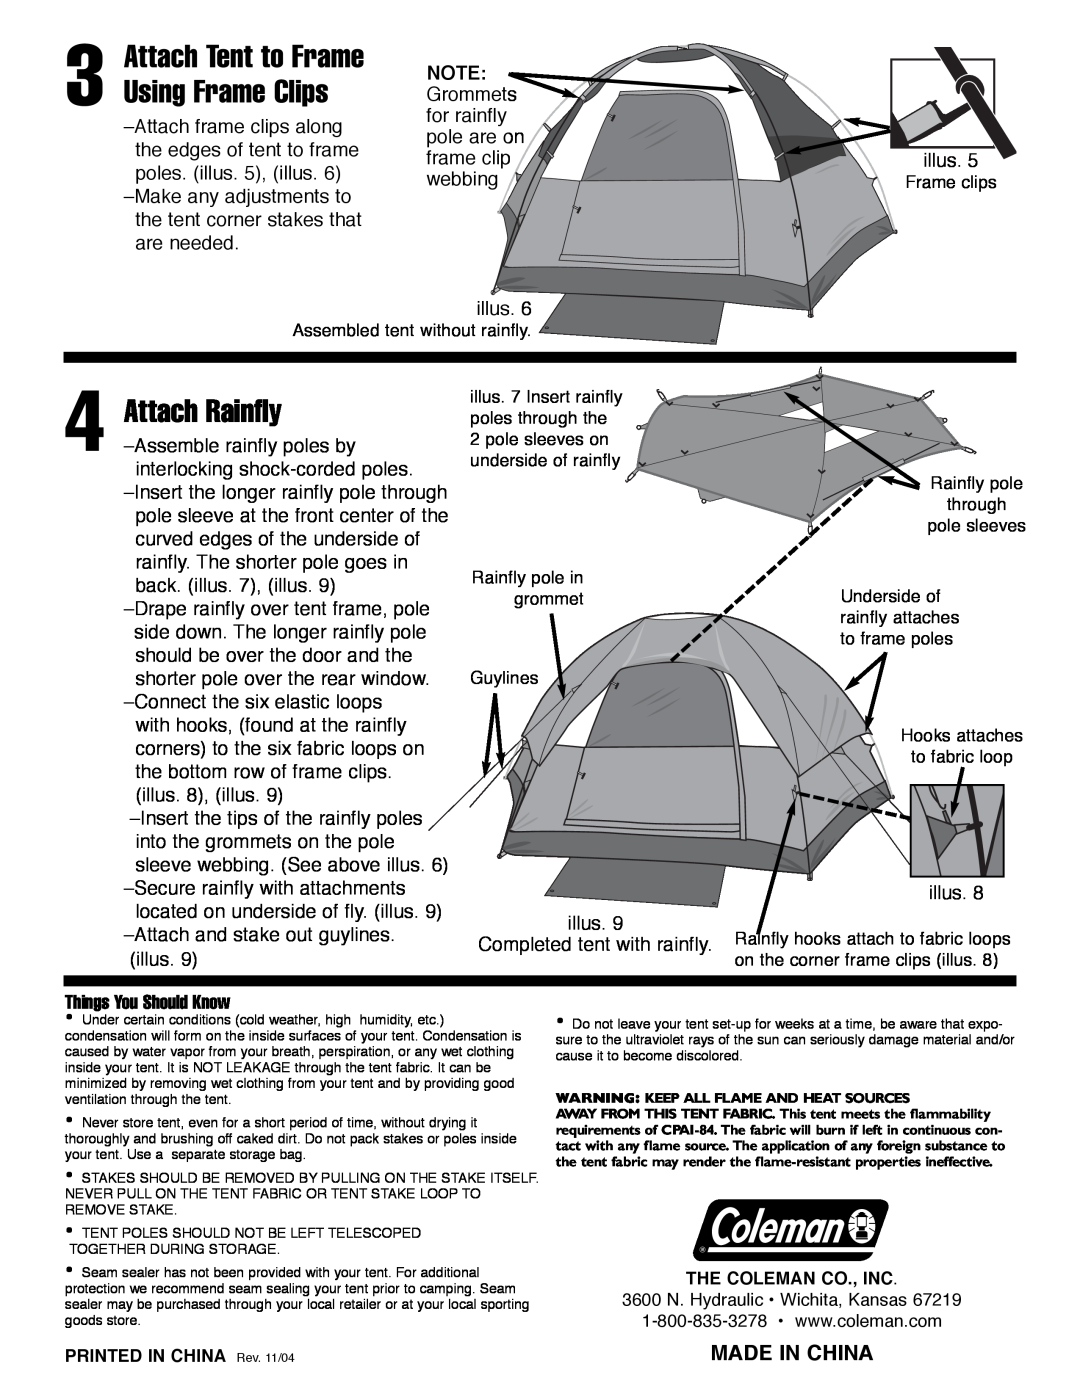 Coleman 9272-304, 9272-162, 9272-306, 9272-302 manual Attach Rainfly, Made In China, Attach Tent to Frame Using Frame Clips 